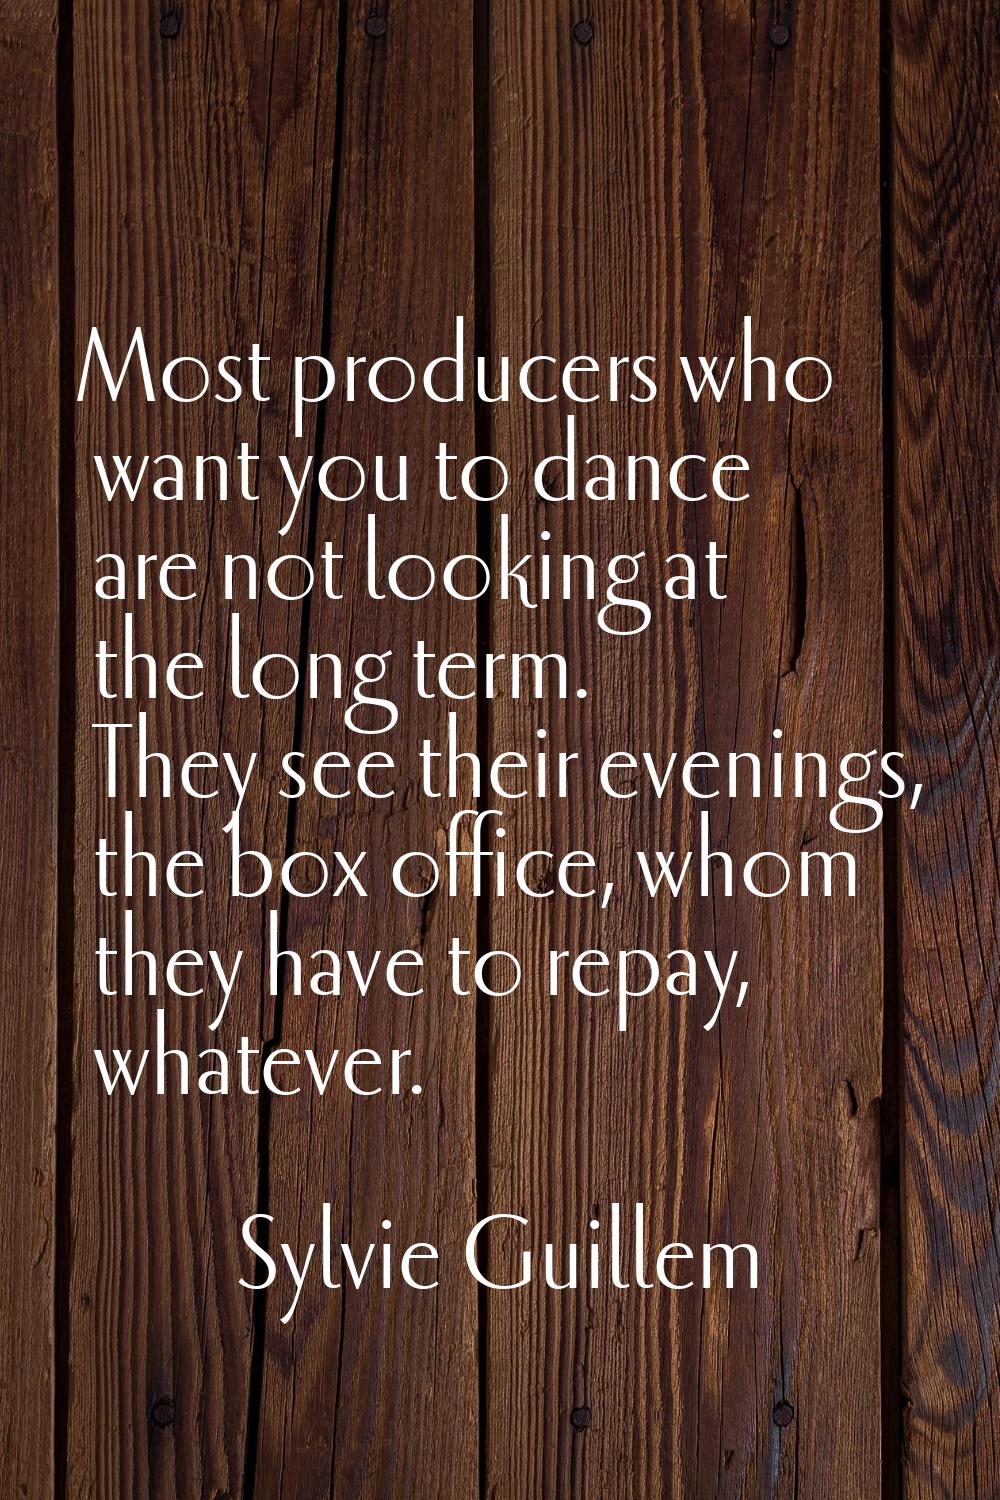 Most producers who want you to dance are not looking at the long term. They see their evenings, the